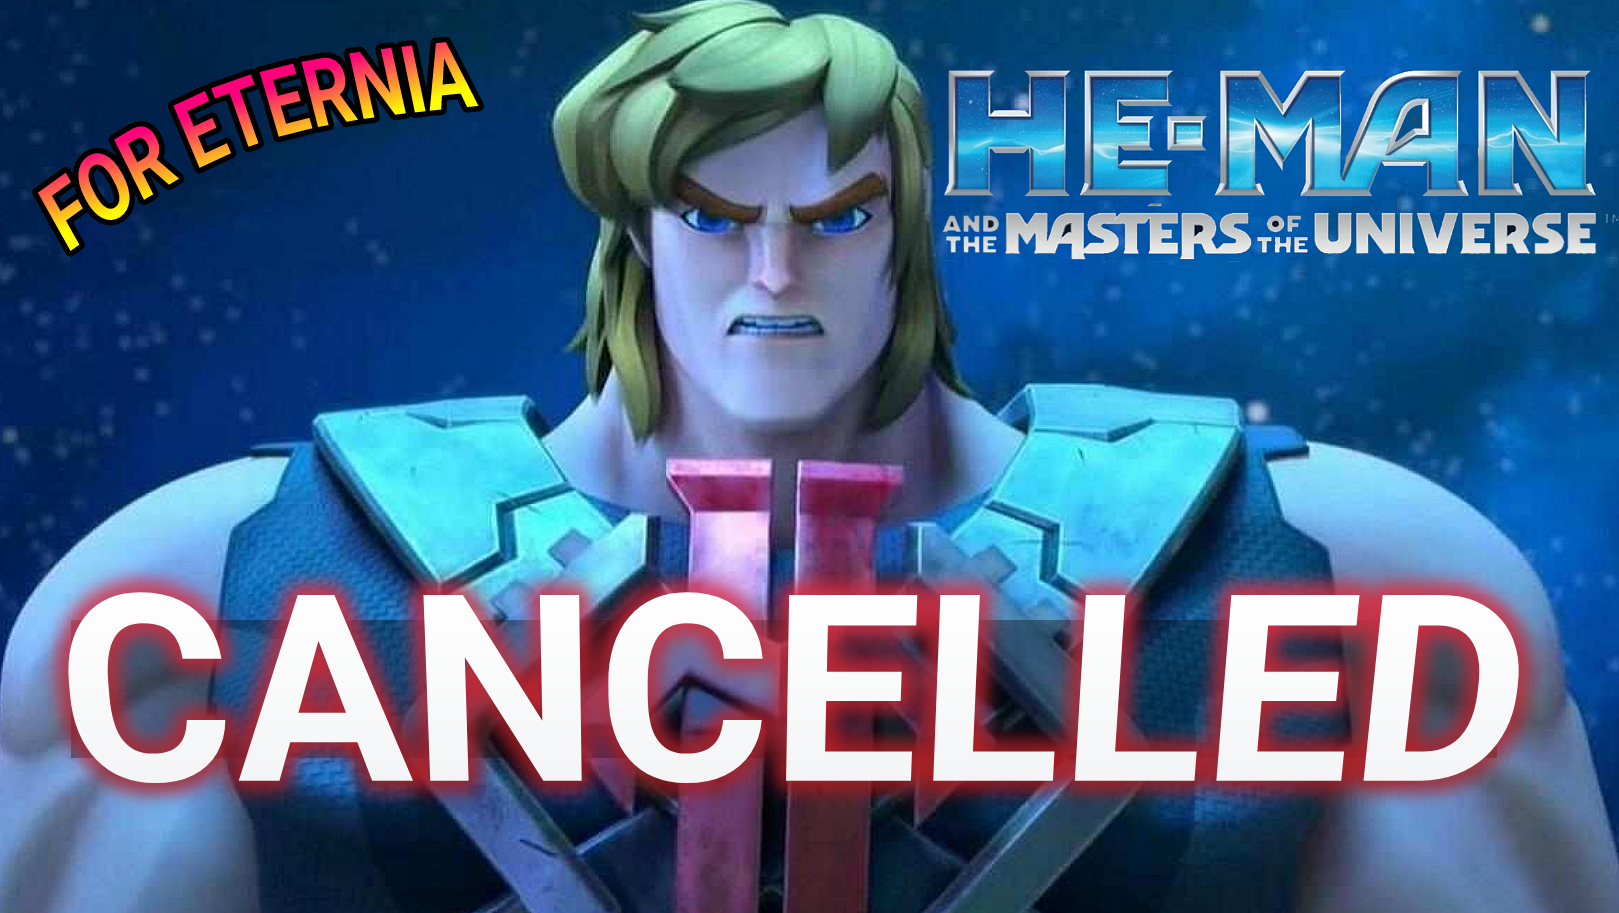 CANCELLED: ”He-Man and the Masters of the Universe” is No More, per Series Writer